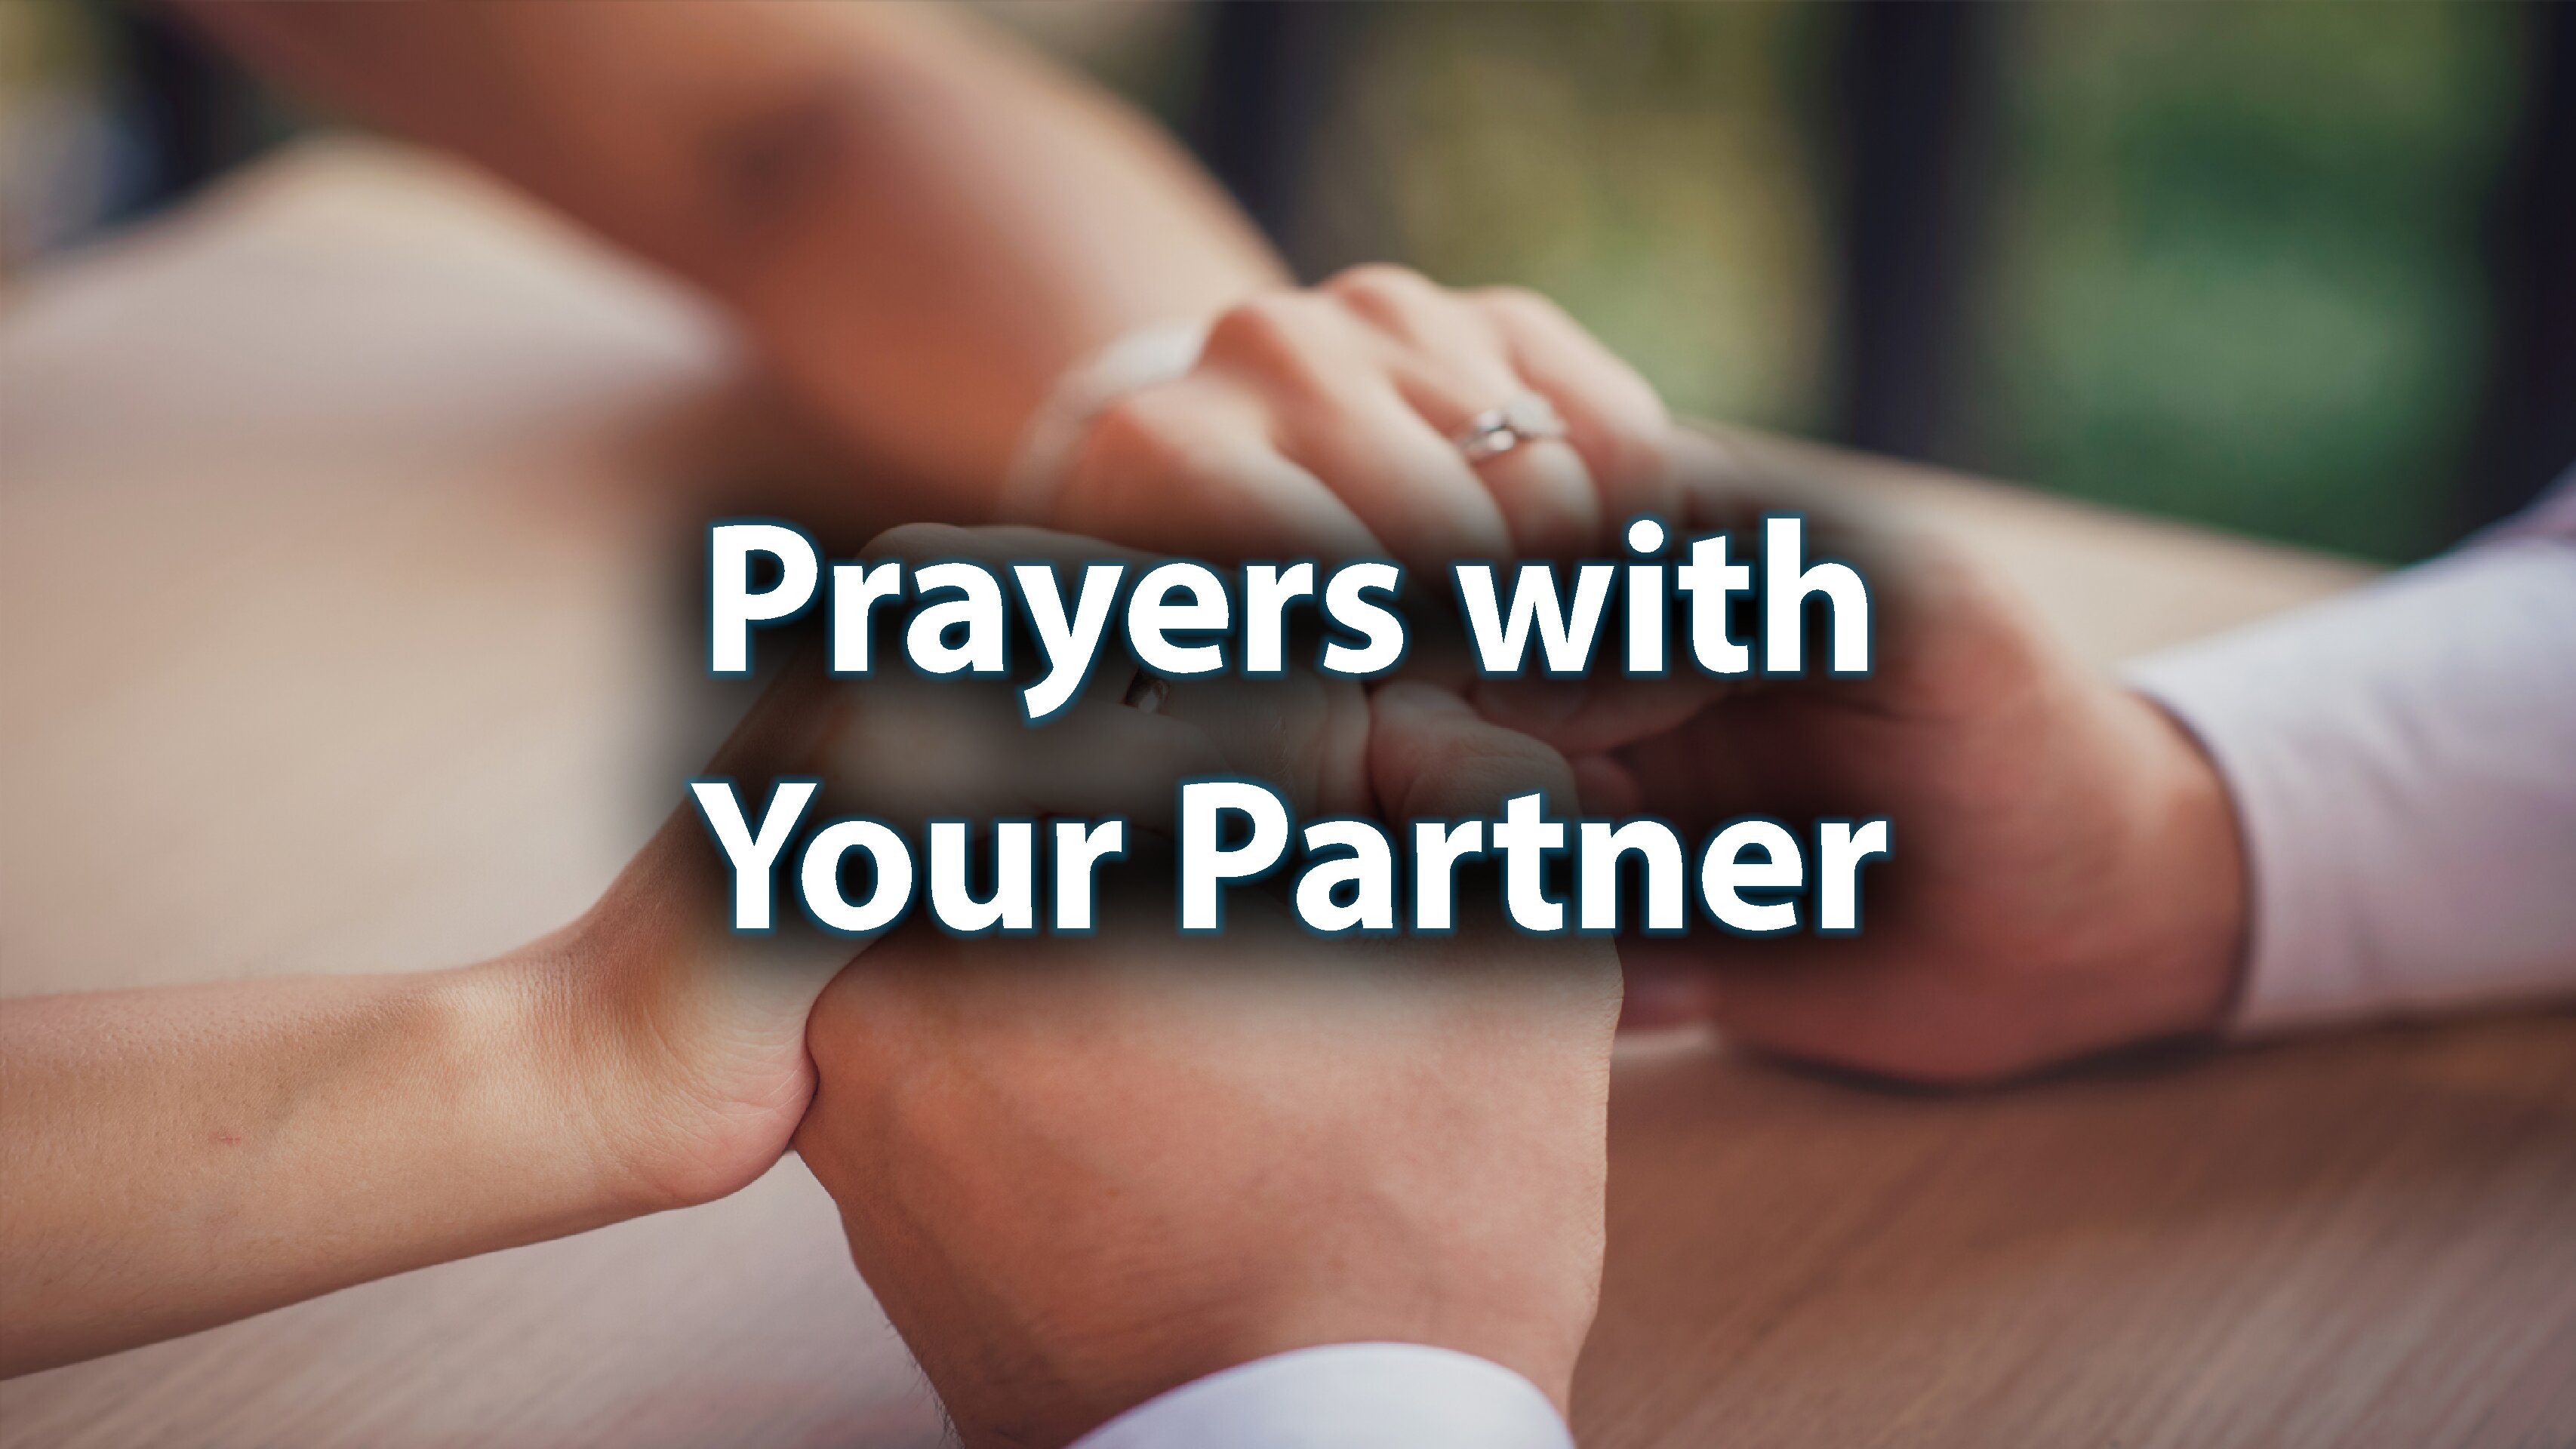 Day 32: Prayers with Your Partner